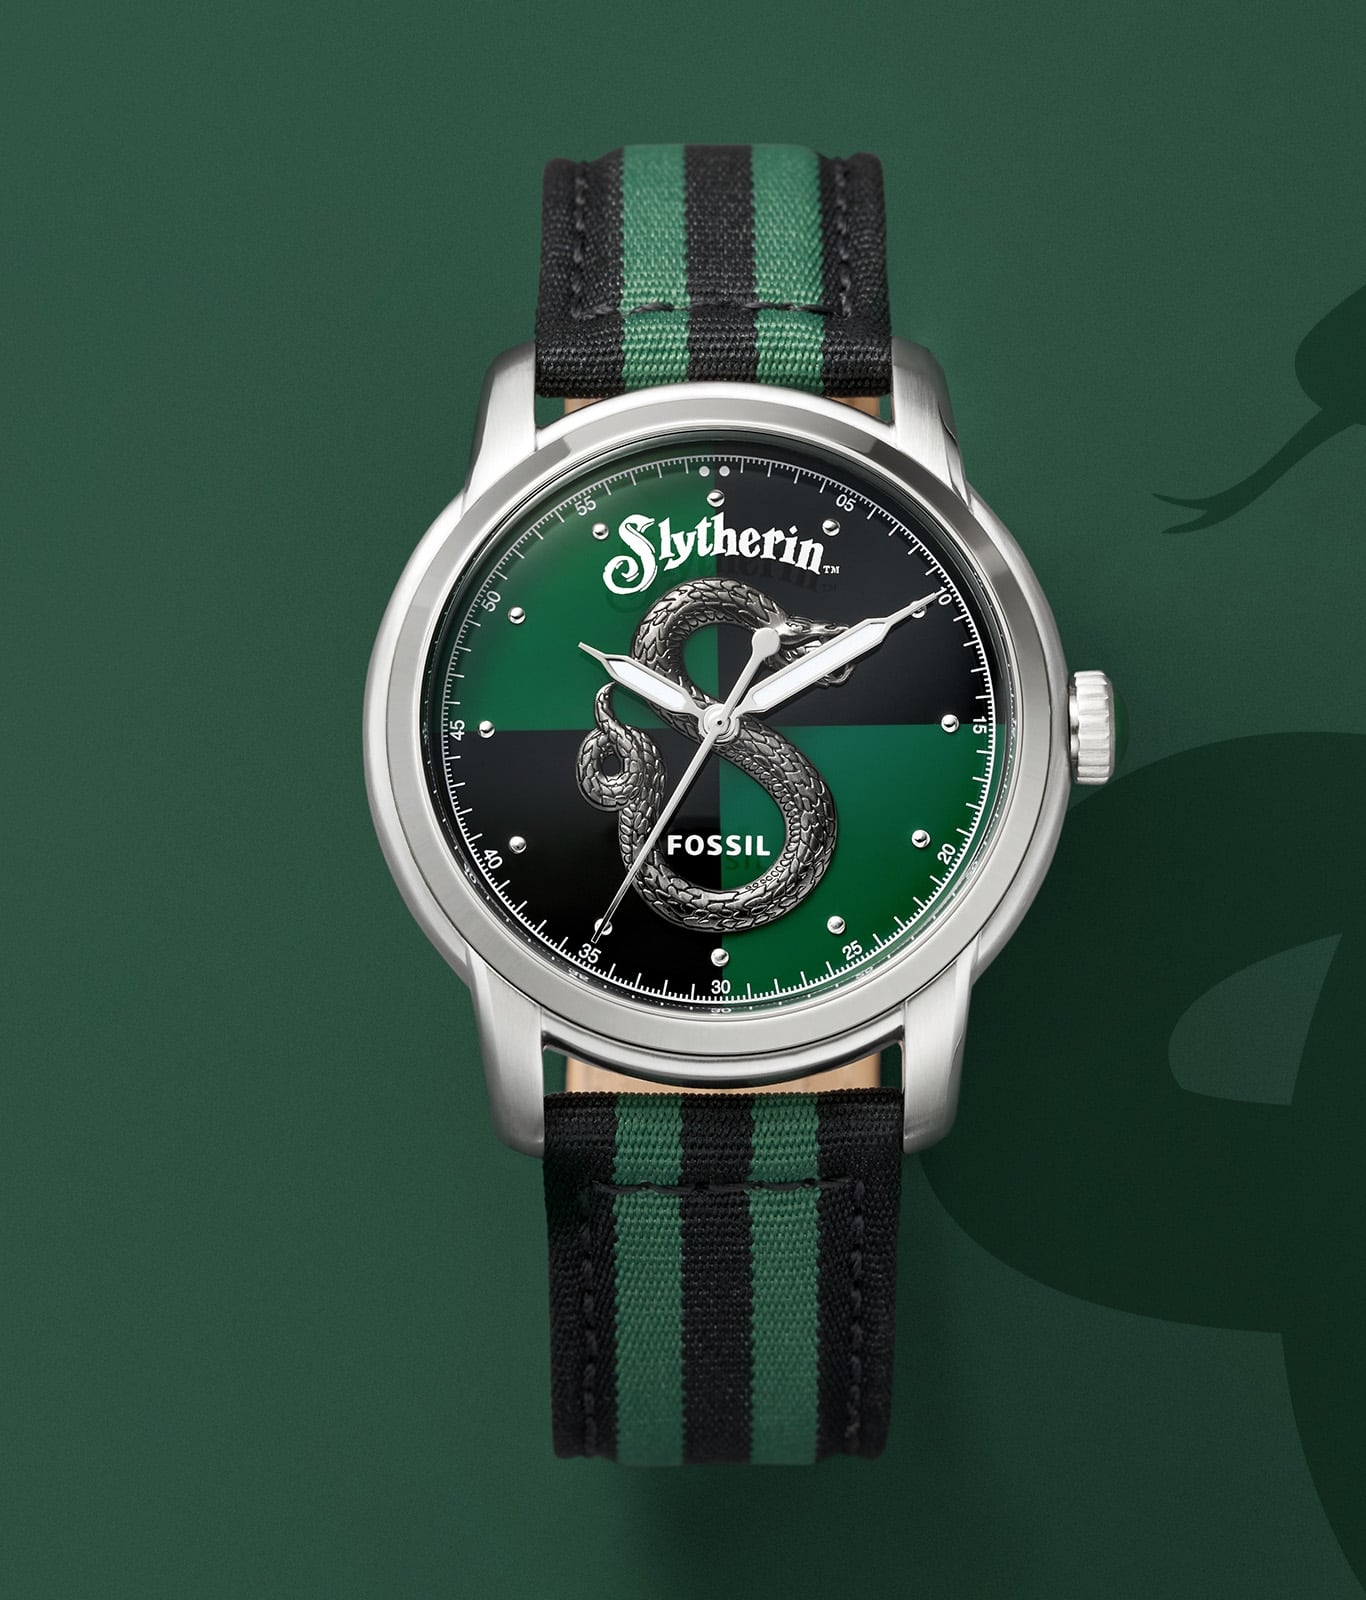 Silver-tone Slytherin house watch with a green and black strap.